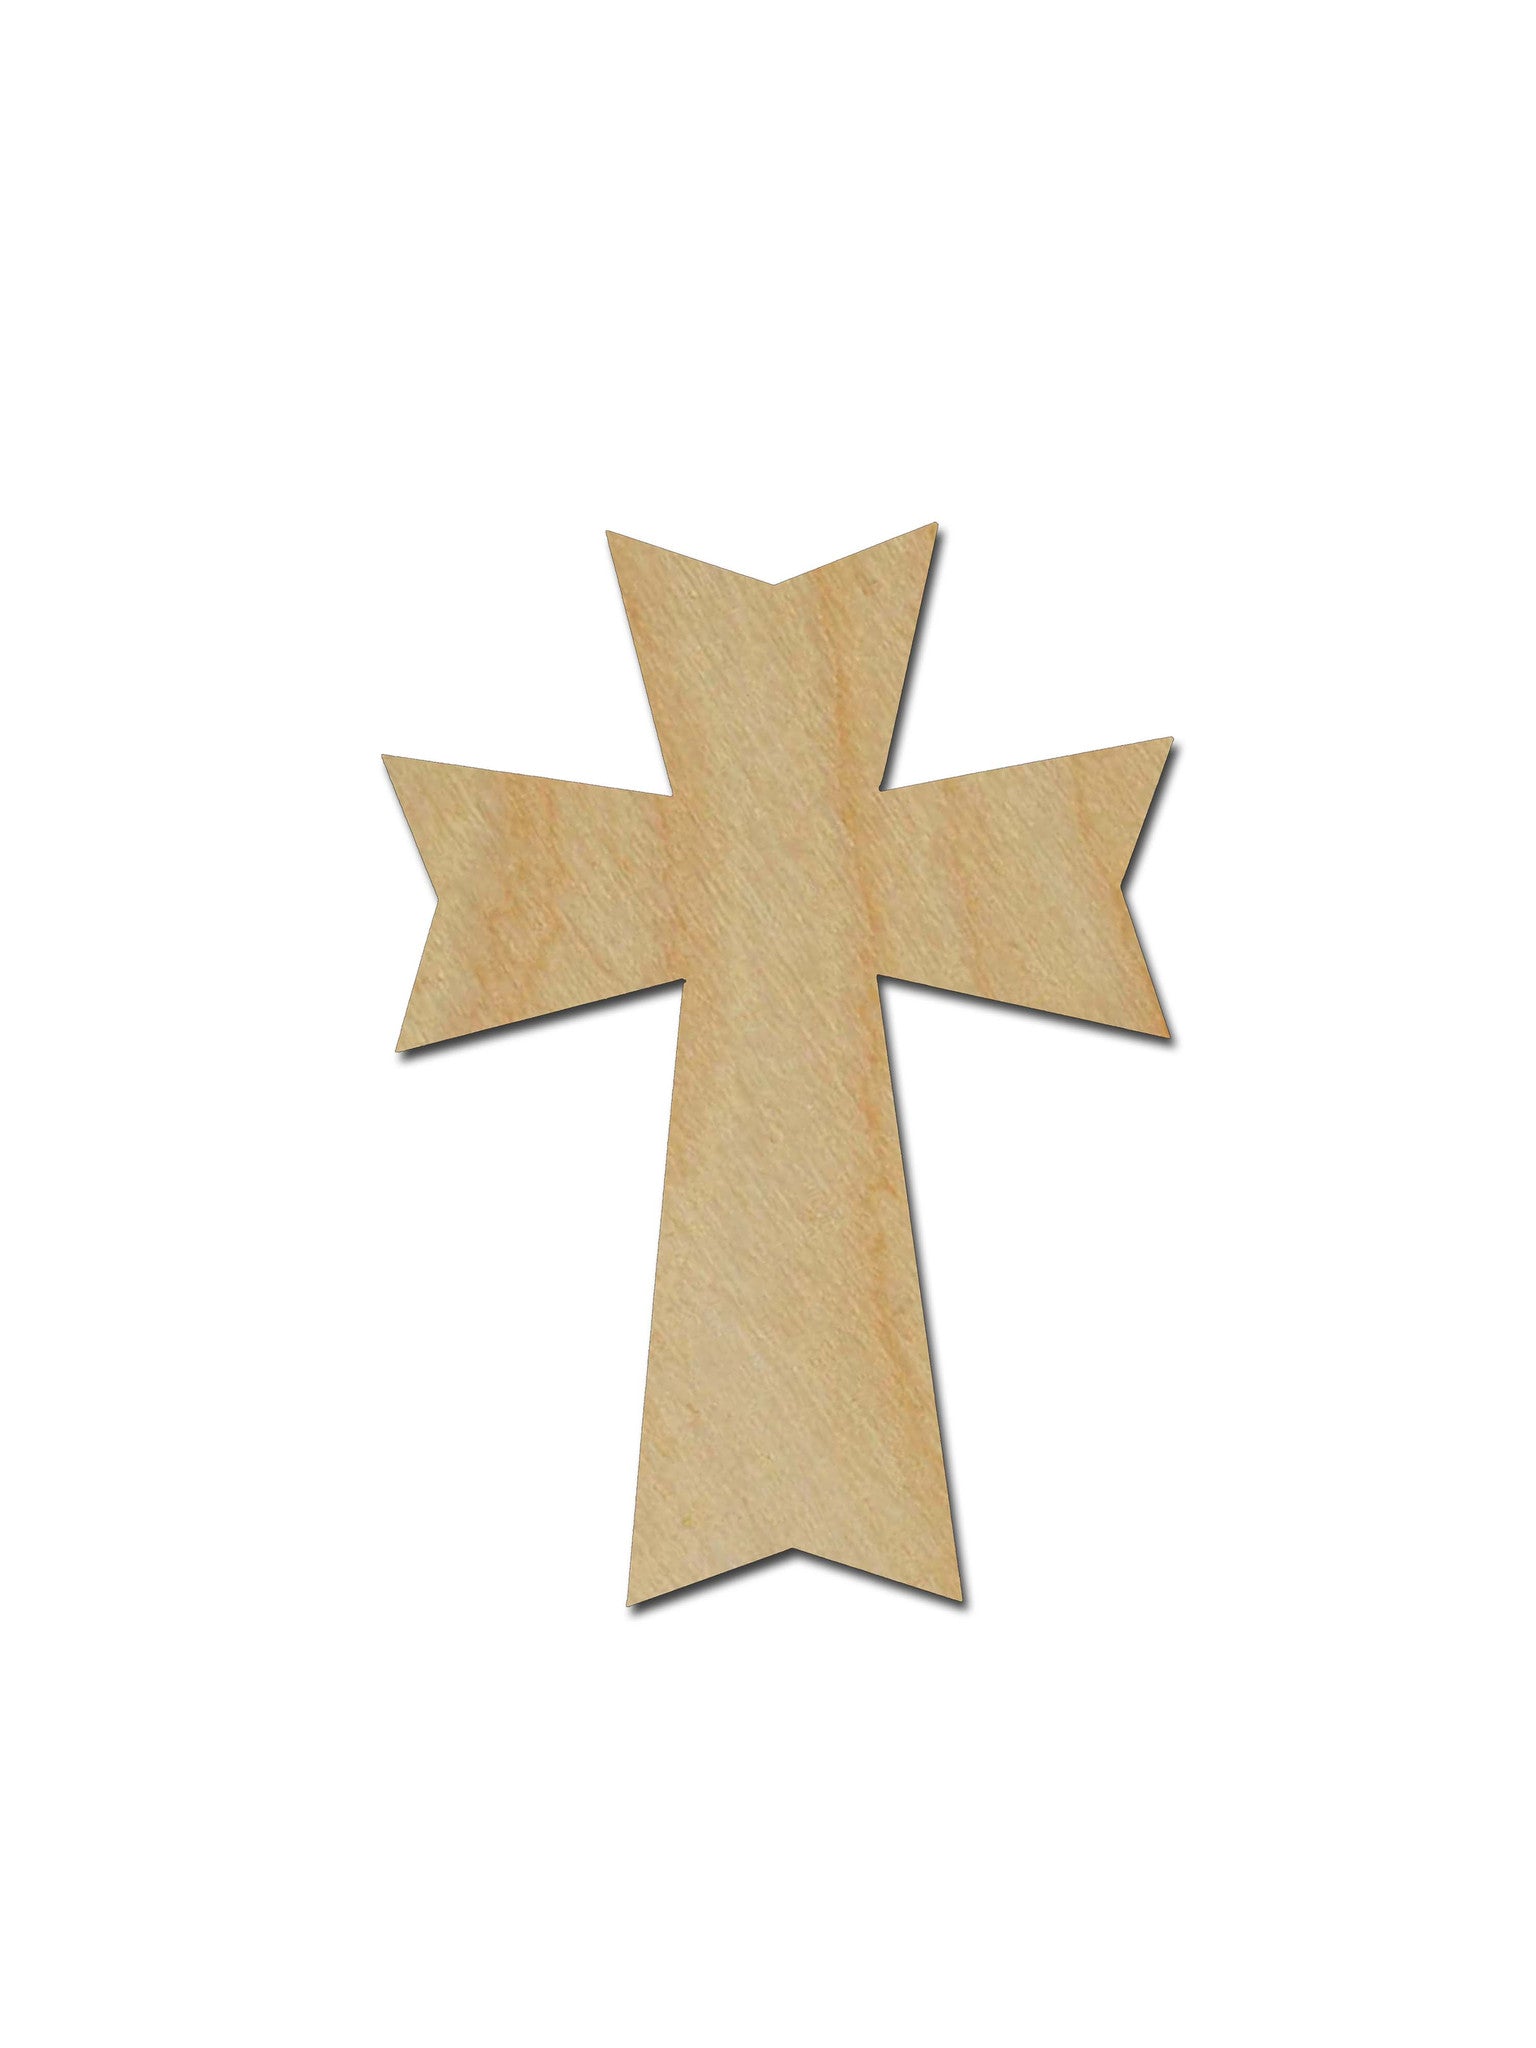 Unfinished Wood Cross Cutout MDF Craft Crosses Variety of Sizes C136